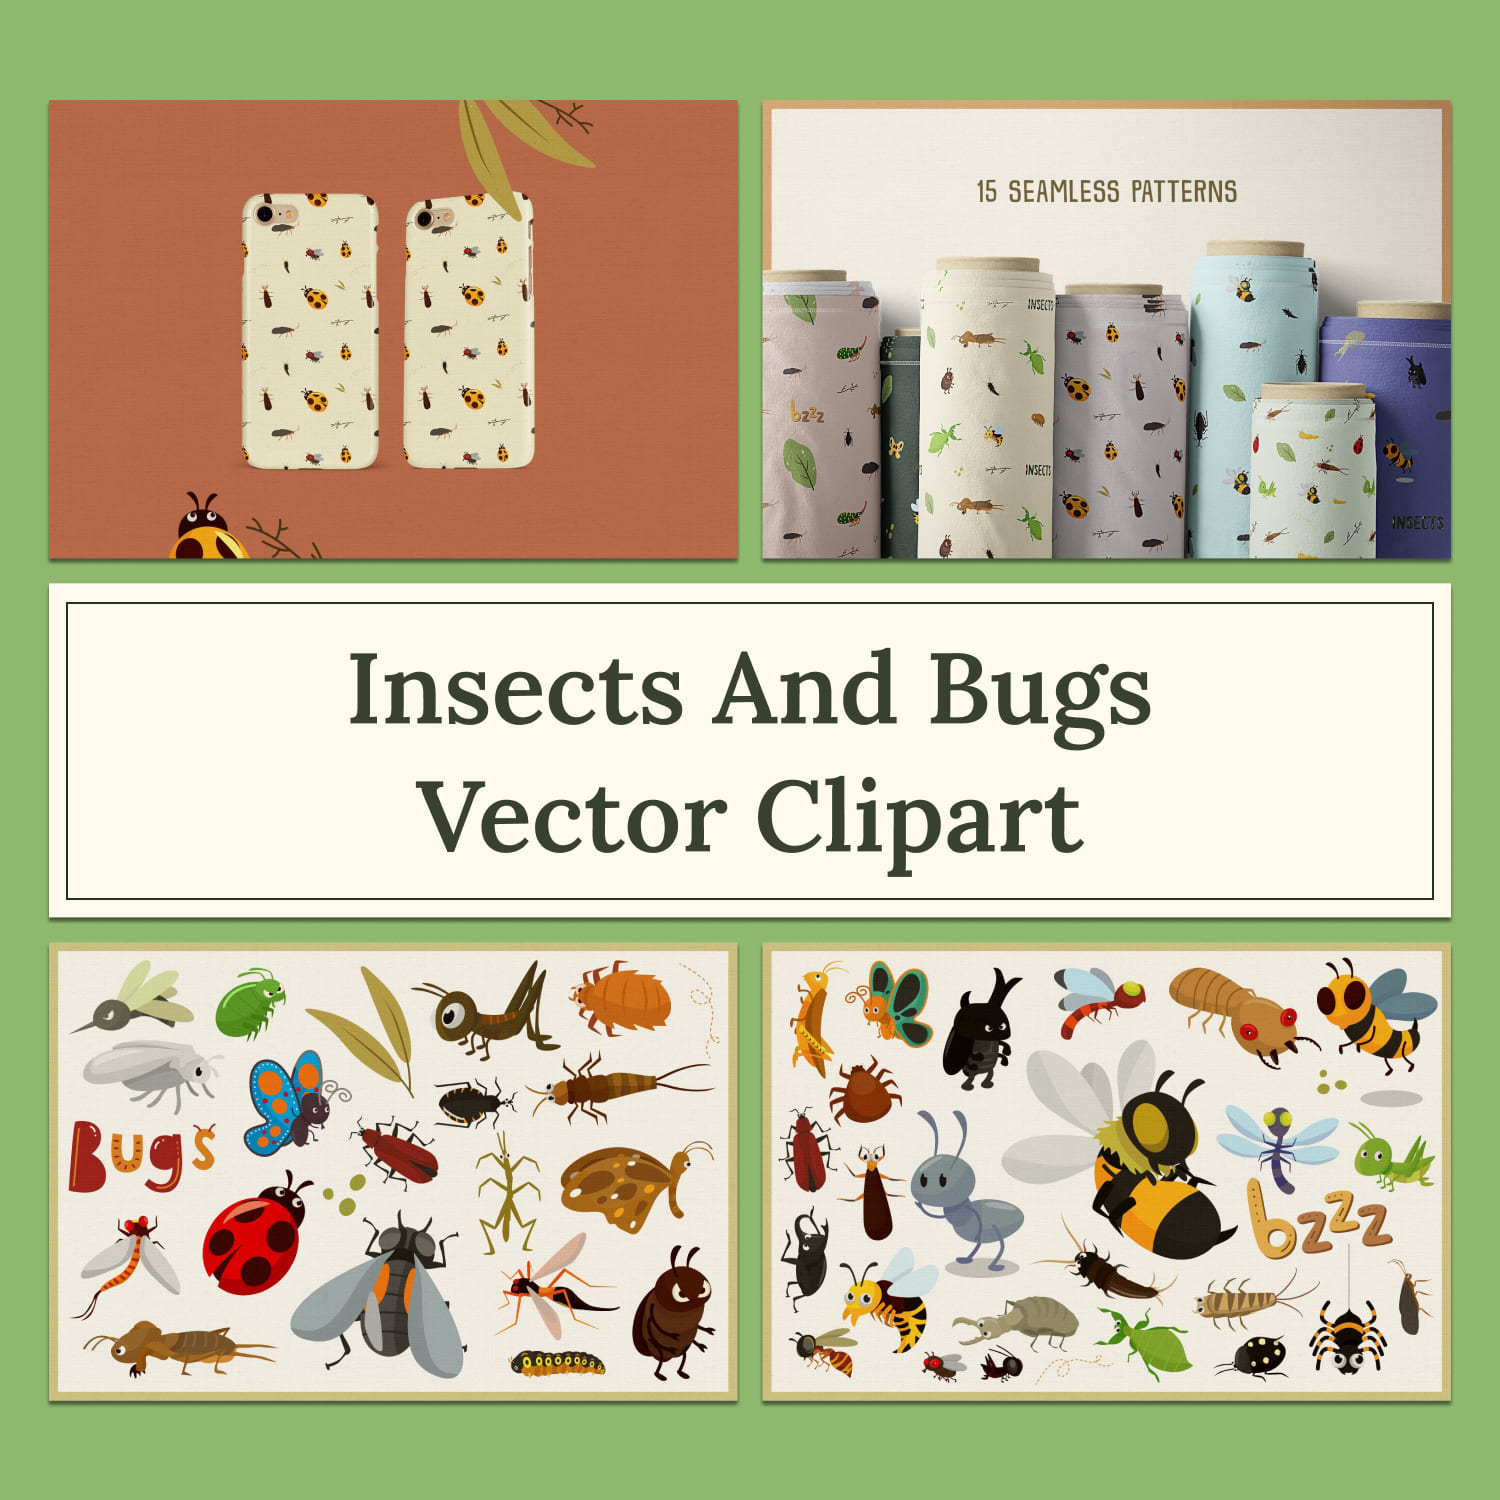 Insects and Bugs Vector Clipart & Seamless Patterns.